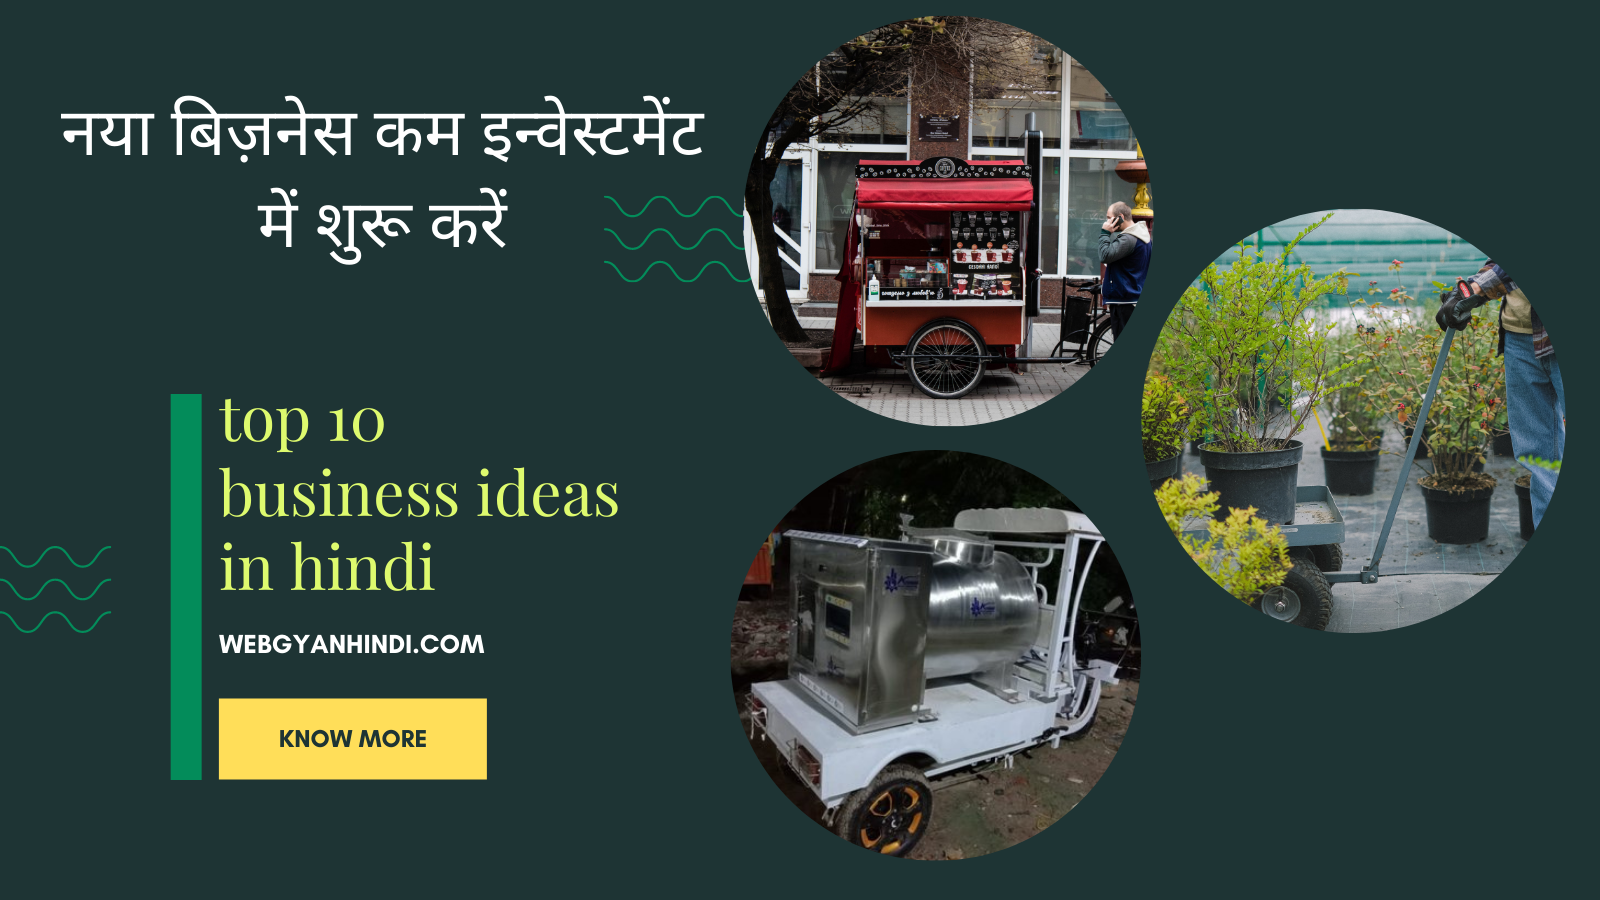 Small Business Ideas In Hindi